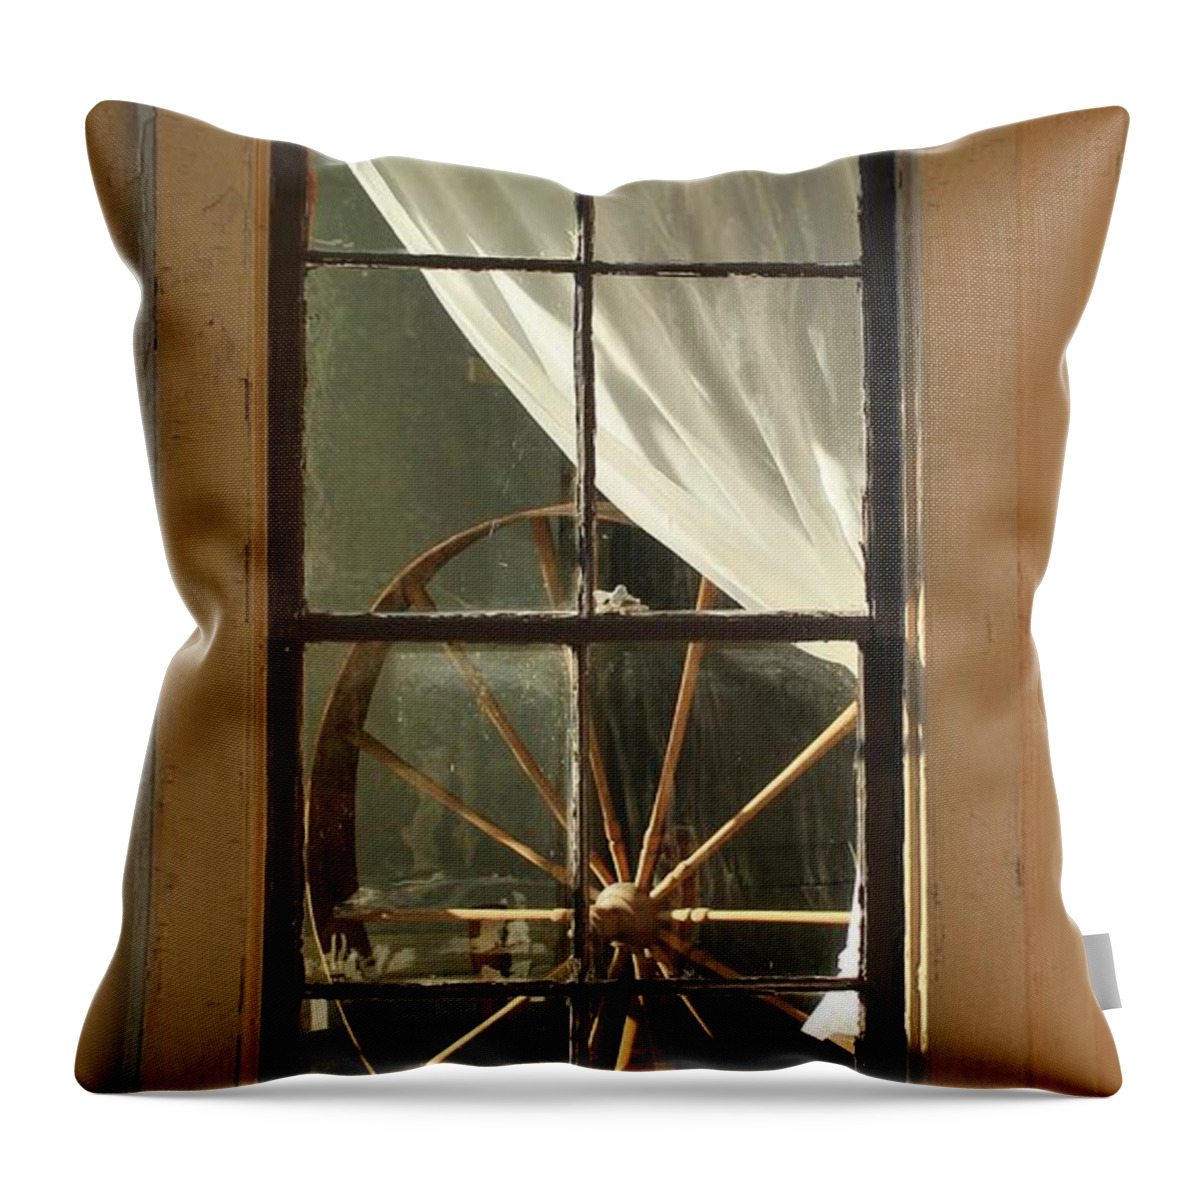 Karen Silvestri Throw Pillow featuring the photograph Looking Into The Past by Karen Silvestri